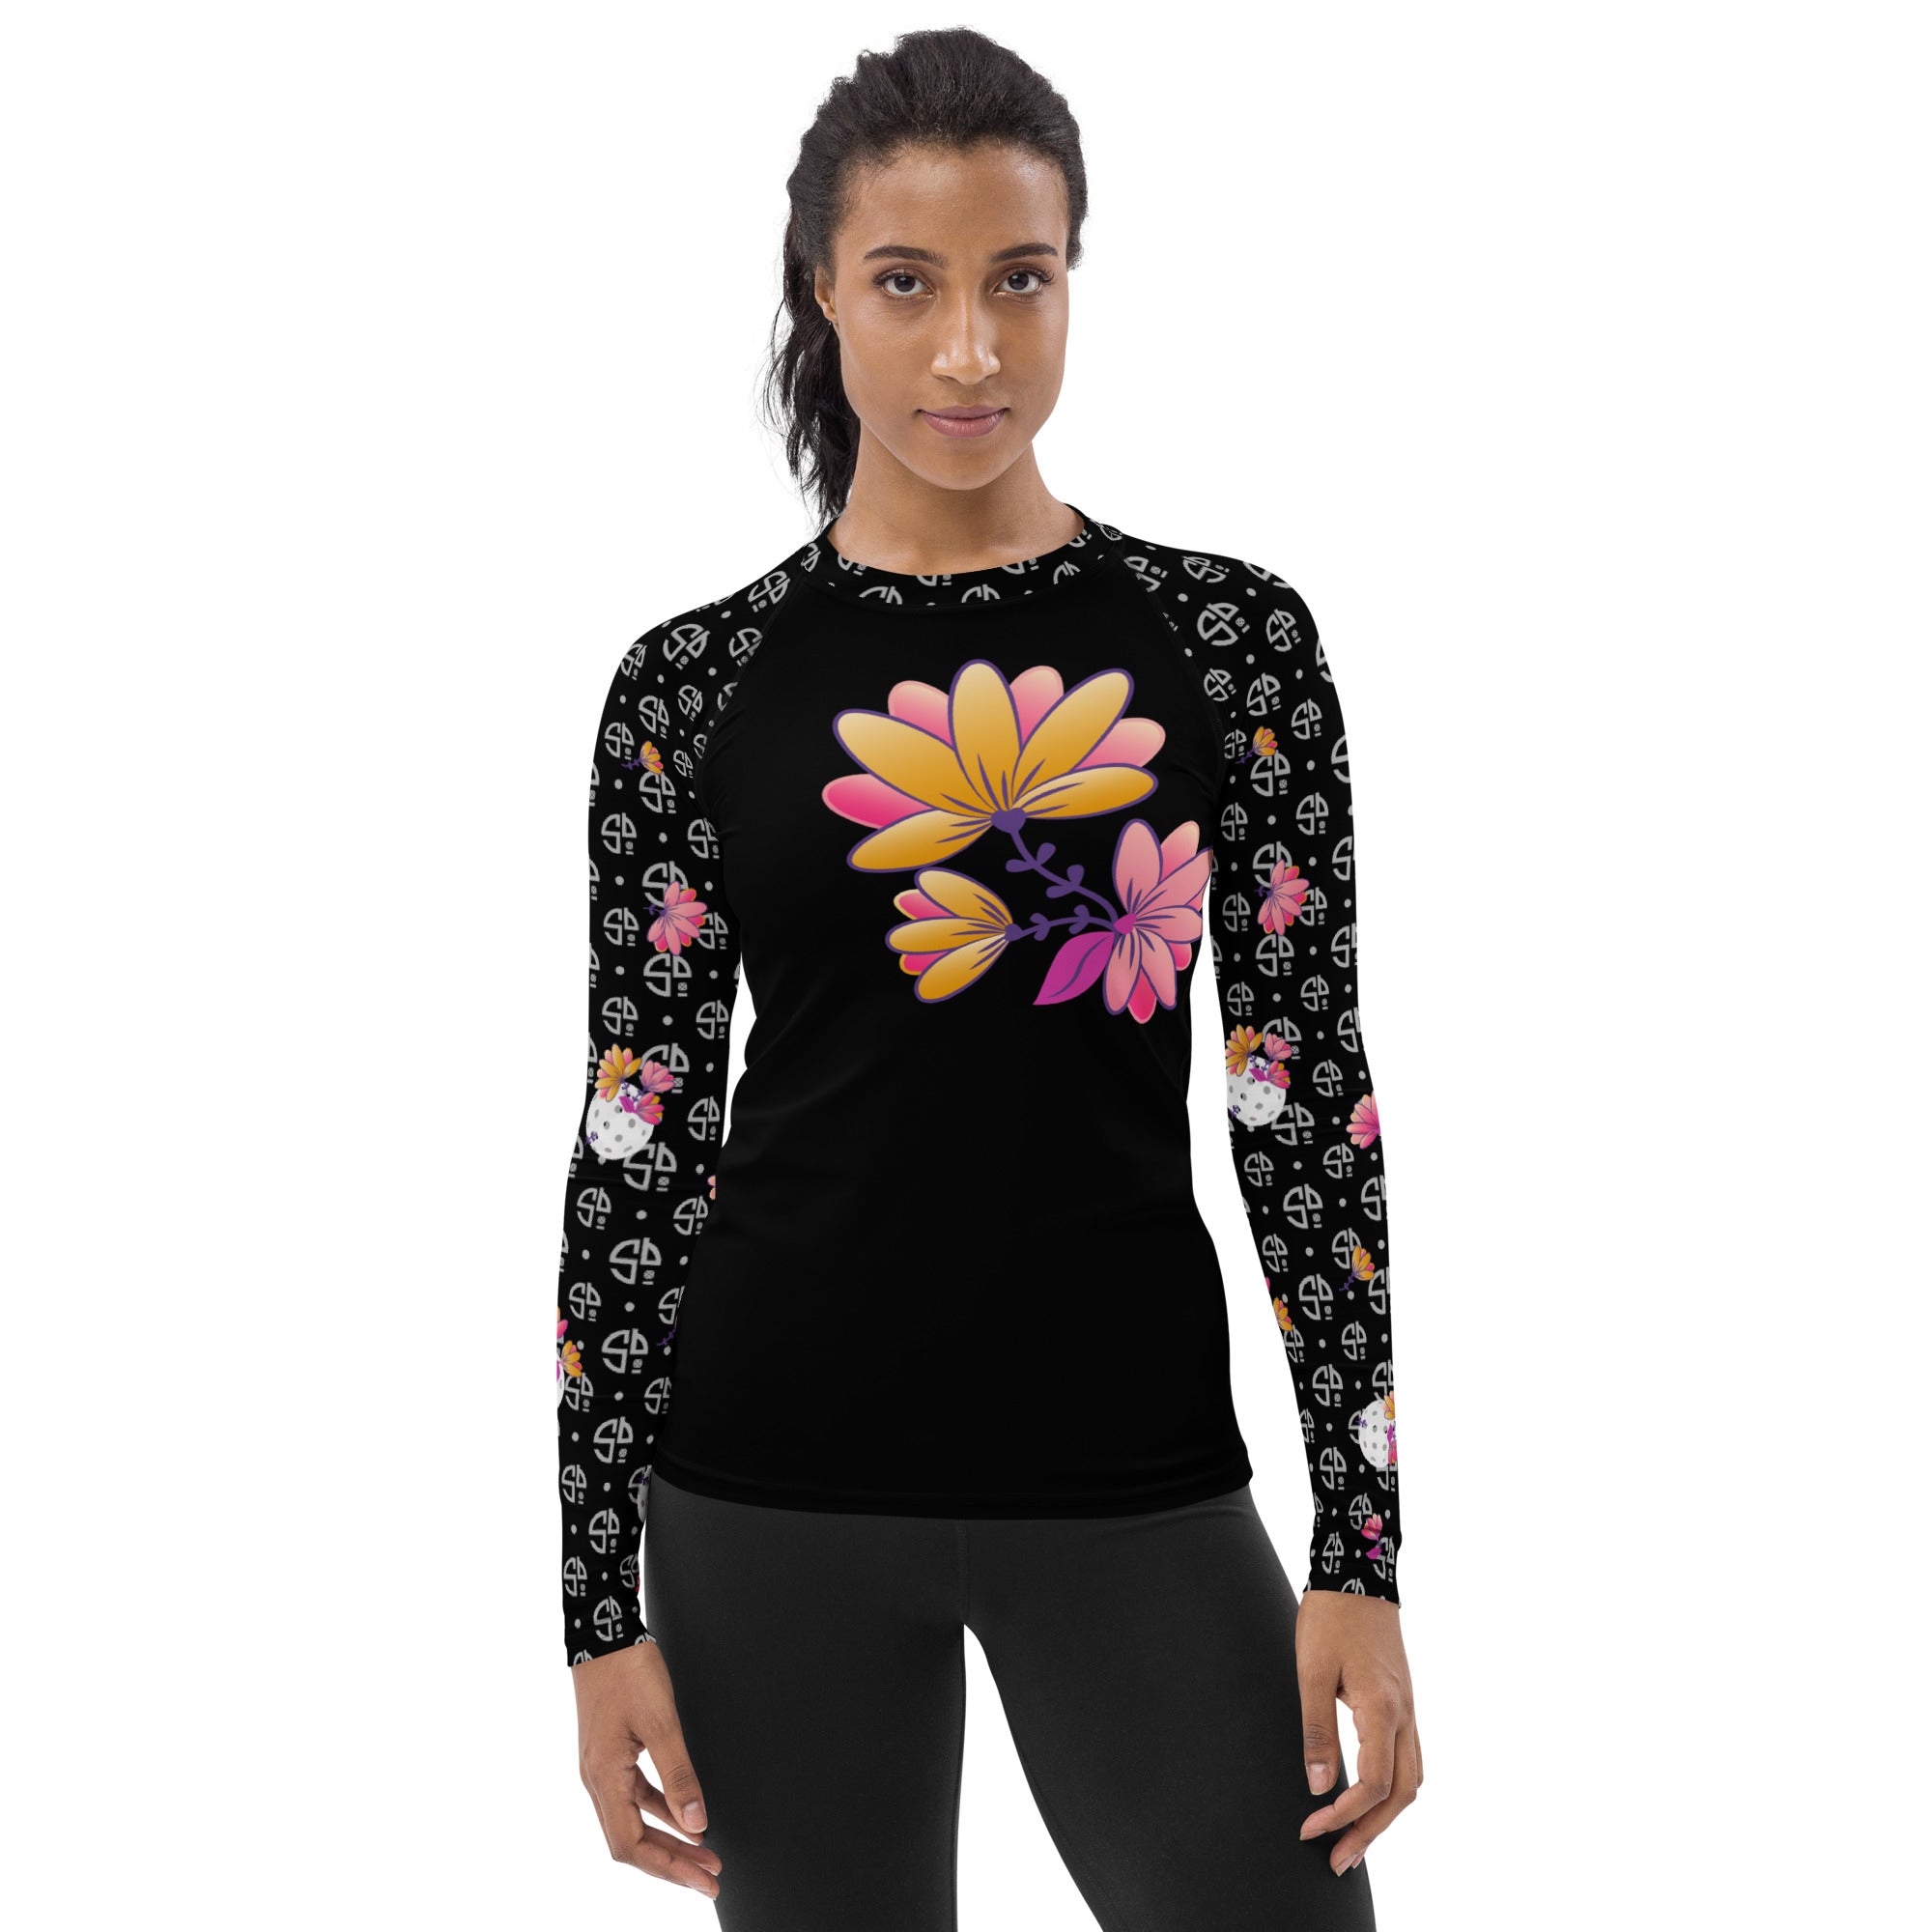 Spring Dink Logo© Ball On! Black, White, Golden Yellow, Beetroot Purple, Prism Violet, & Wood Violet Women's Performance Long Sleeve Shirt for Pickleball Enthusiasts, UPF 50+